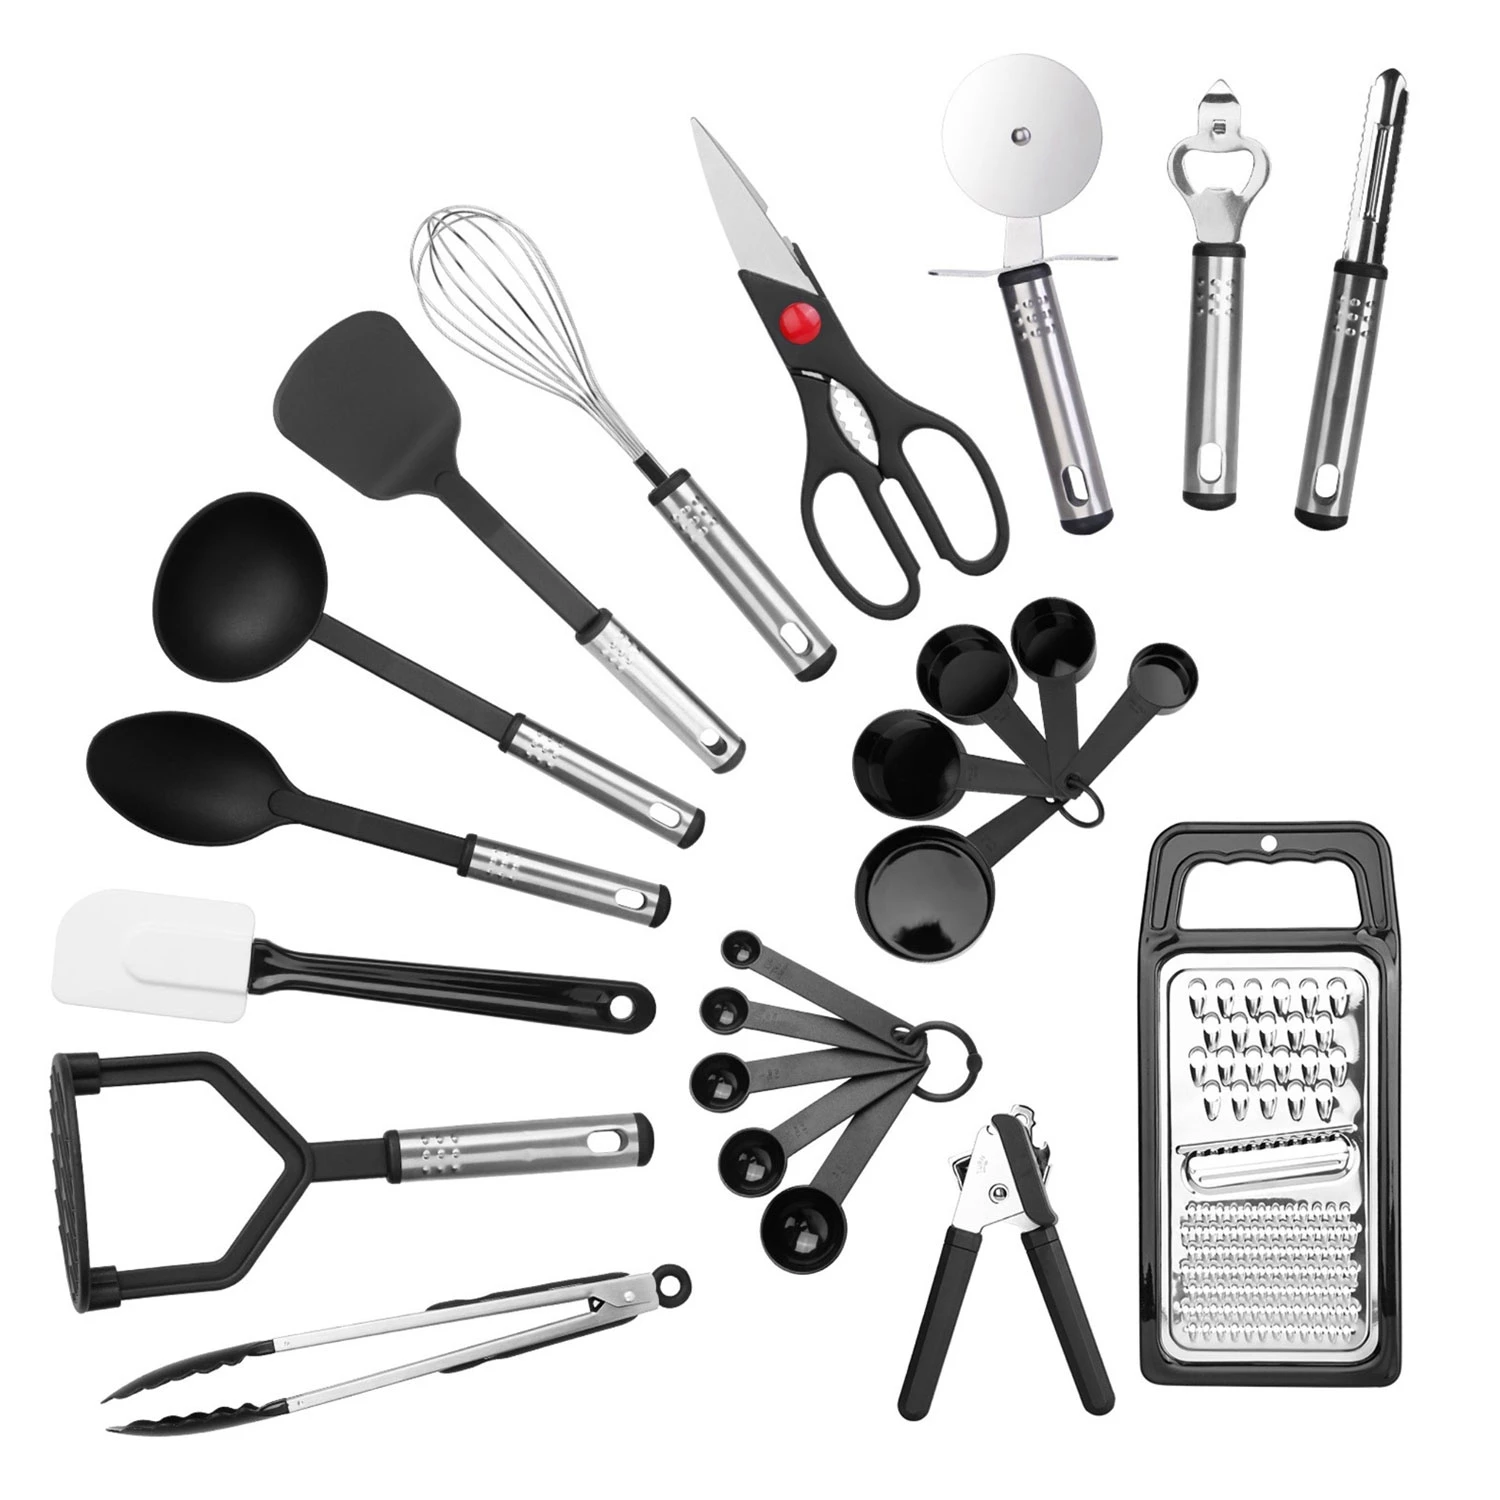 23-piece Stainless Steel Nylon Kitchen Utensil Set: Heat Resistant Cooking Tool Kit With Grater, Scr